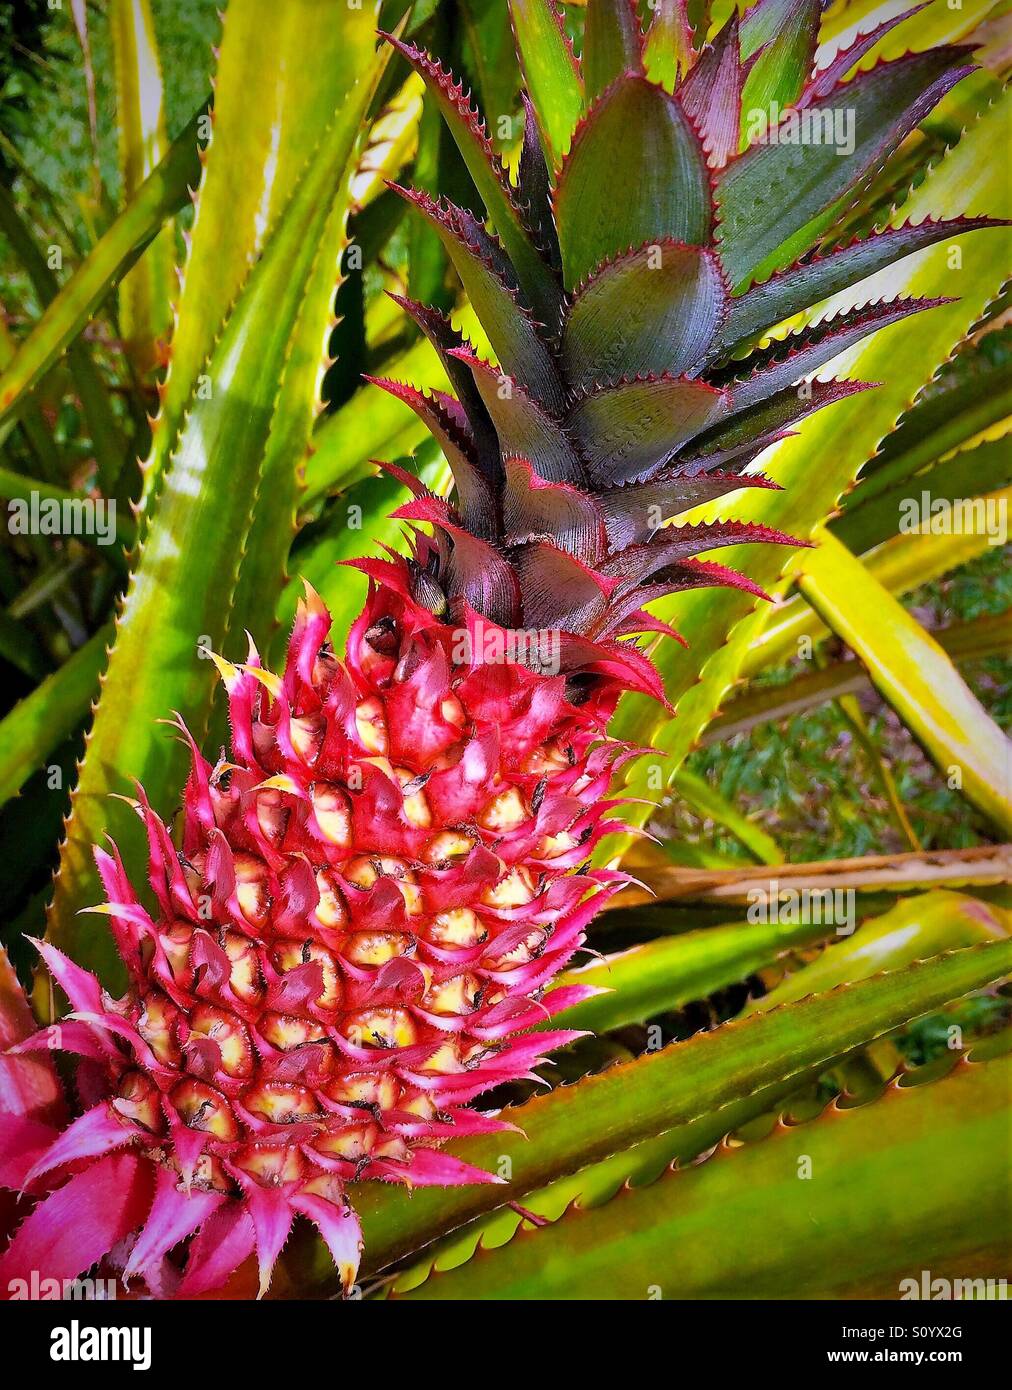 Ornamental pineapple plant with green leaf blade background, Ananas bracteatus Stock Photo